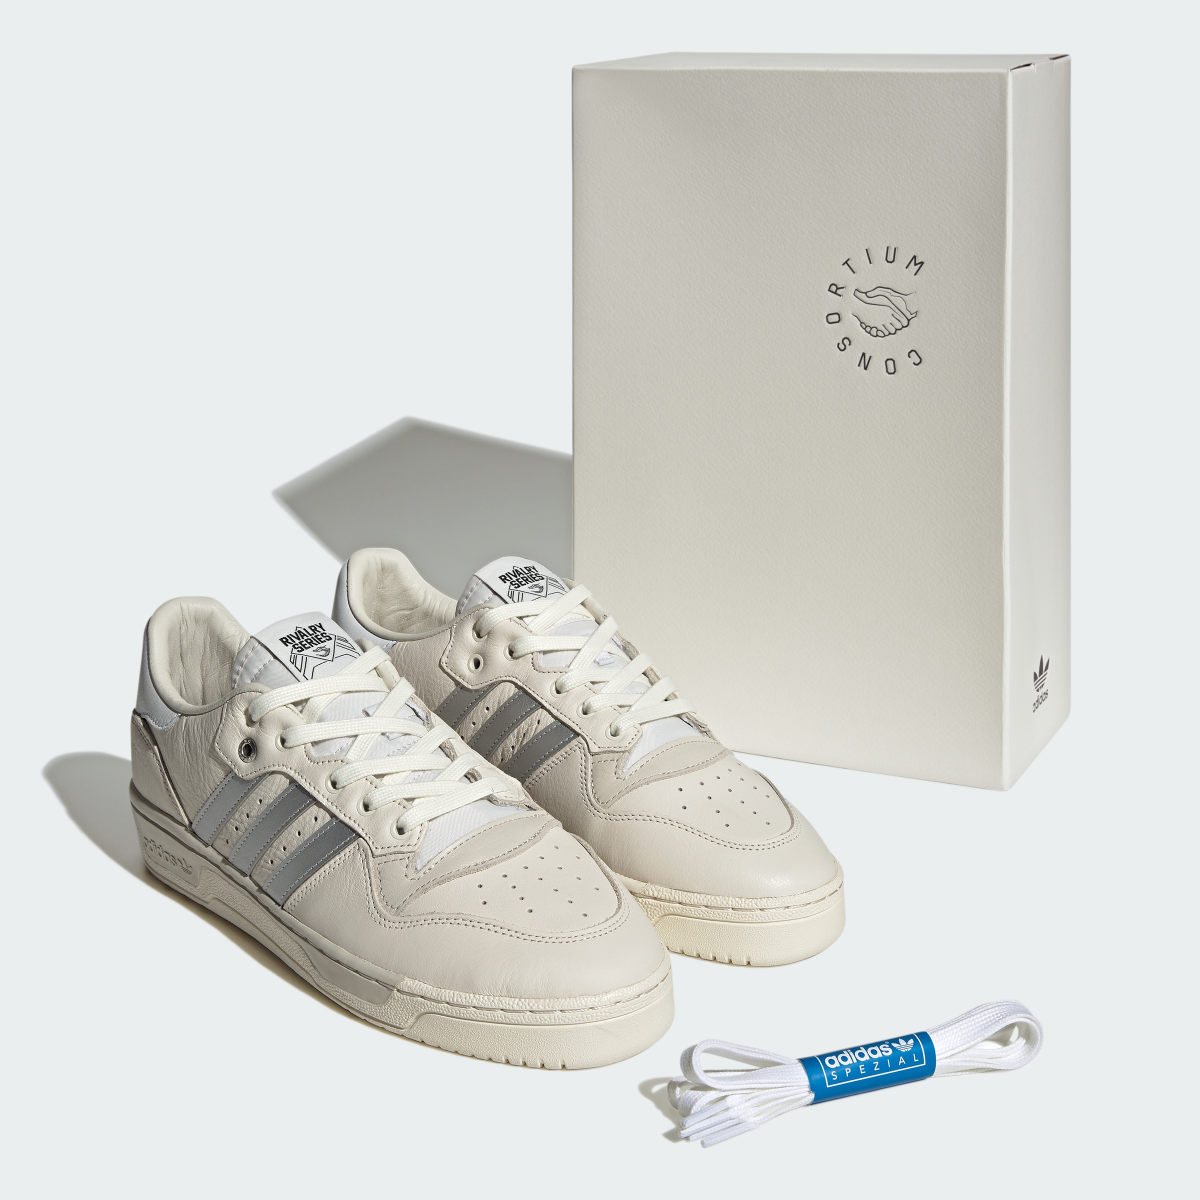 Adidas Rivalry Low Consortium Shoes. 10